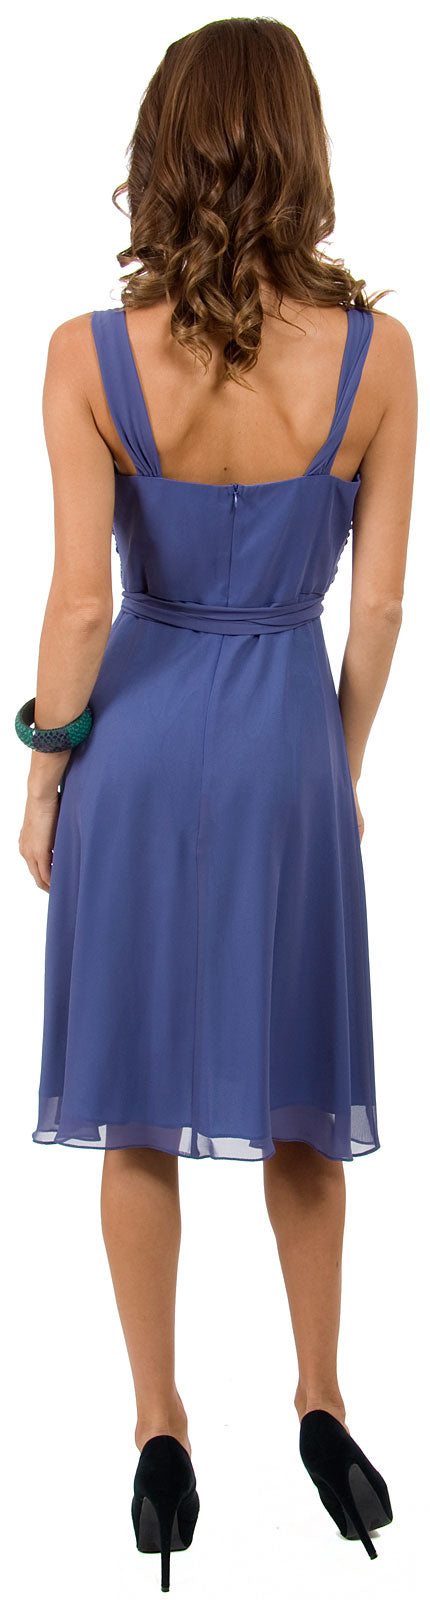 Image of Cowl Neck Knee Length Bridesmaid Party Dress  back